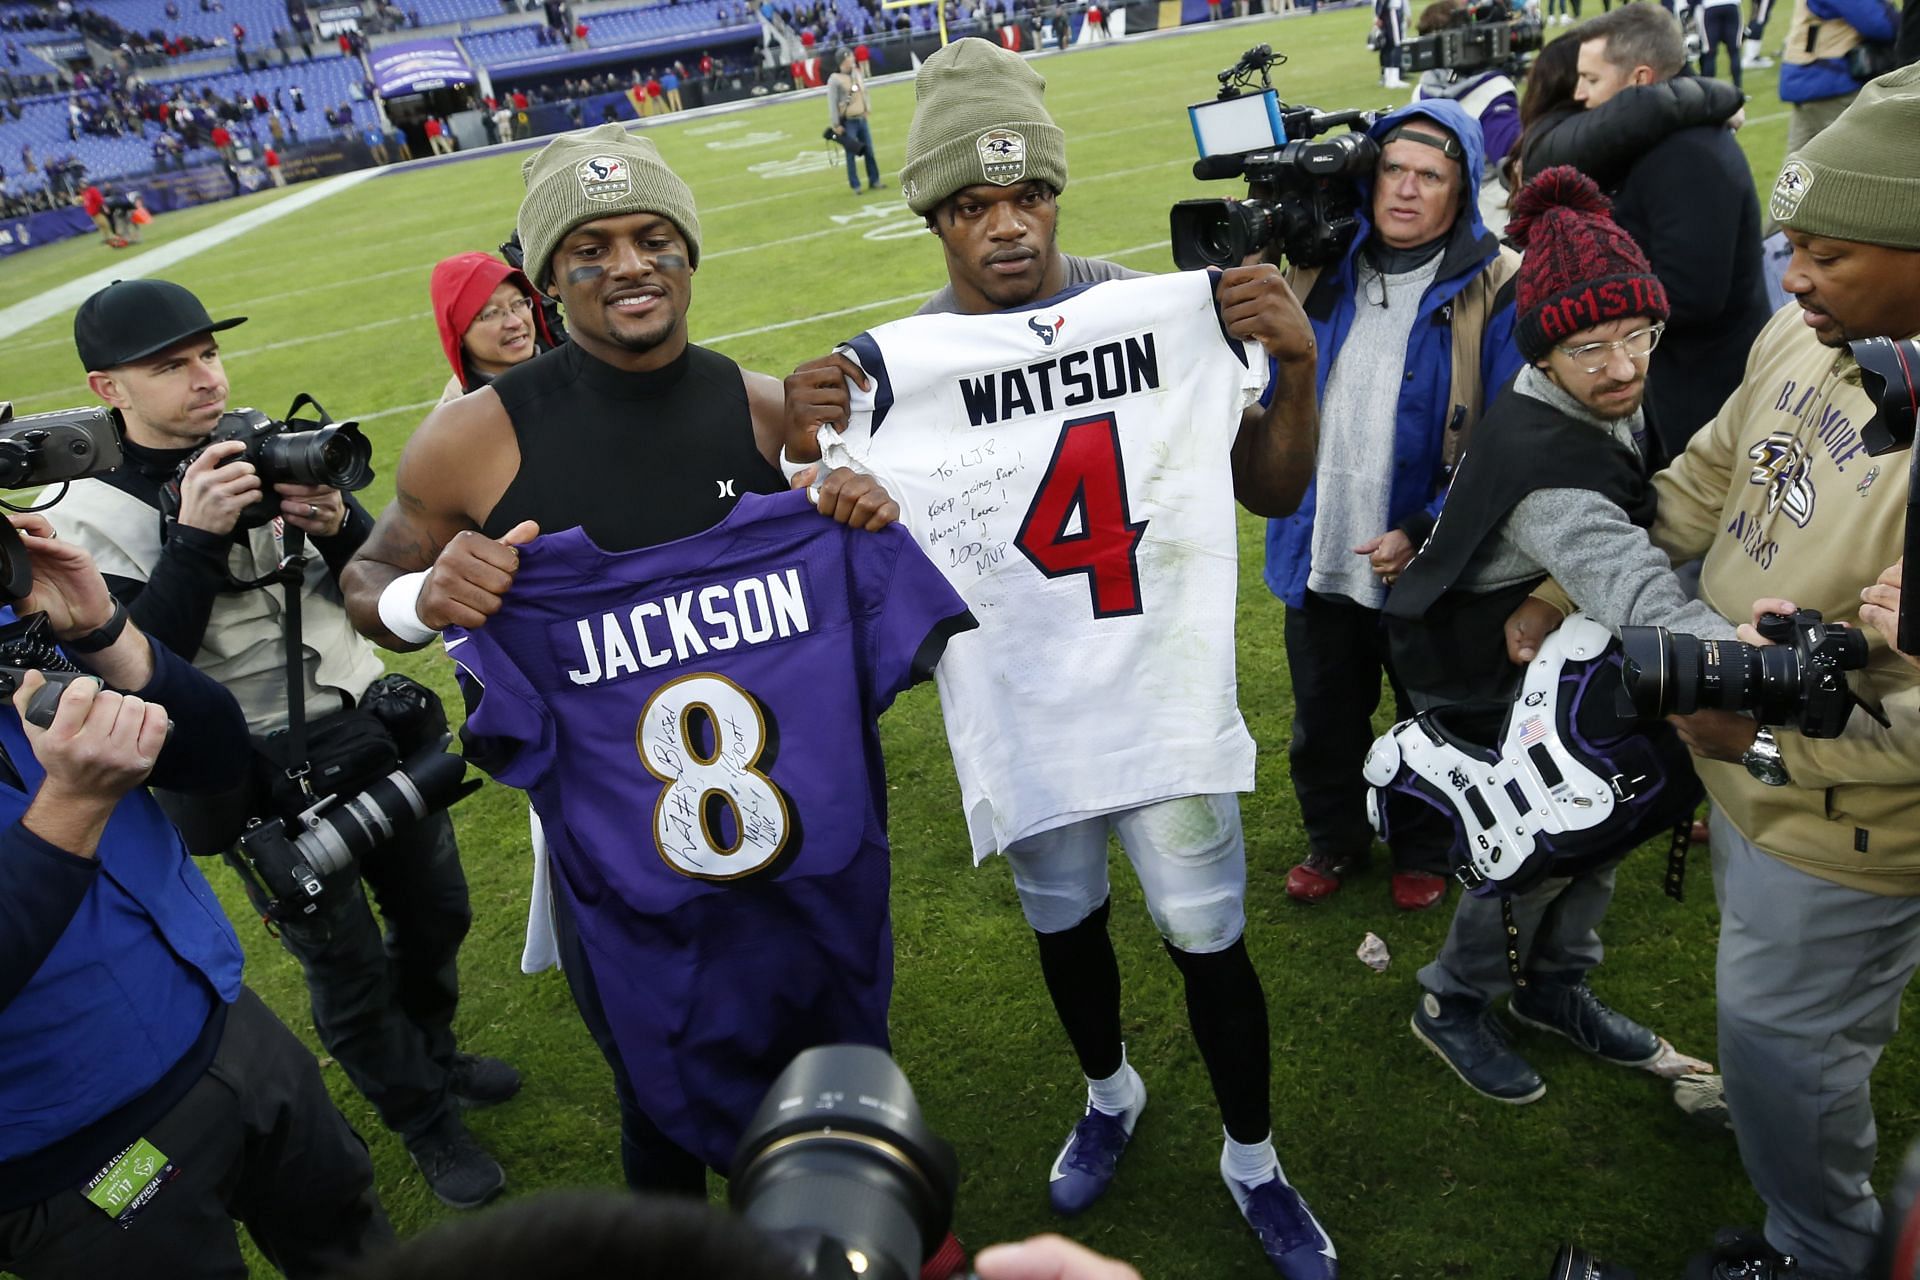 Lamar Jackson turned down 5-year, $250M Ravens contract